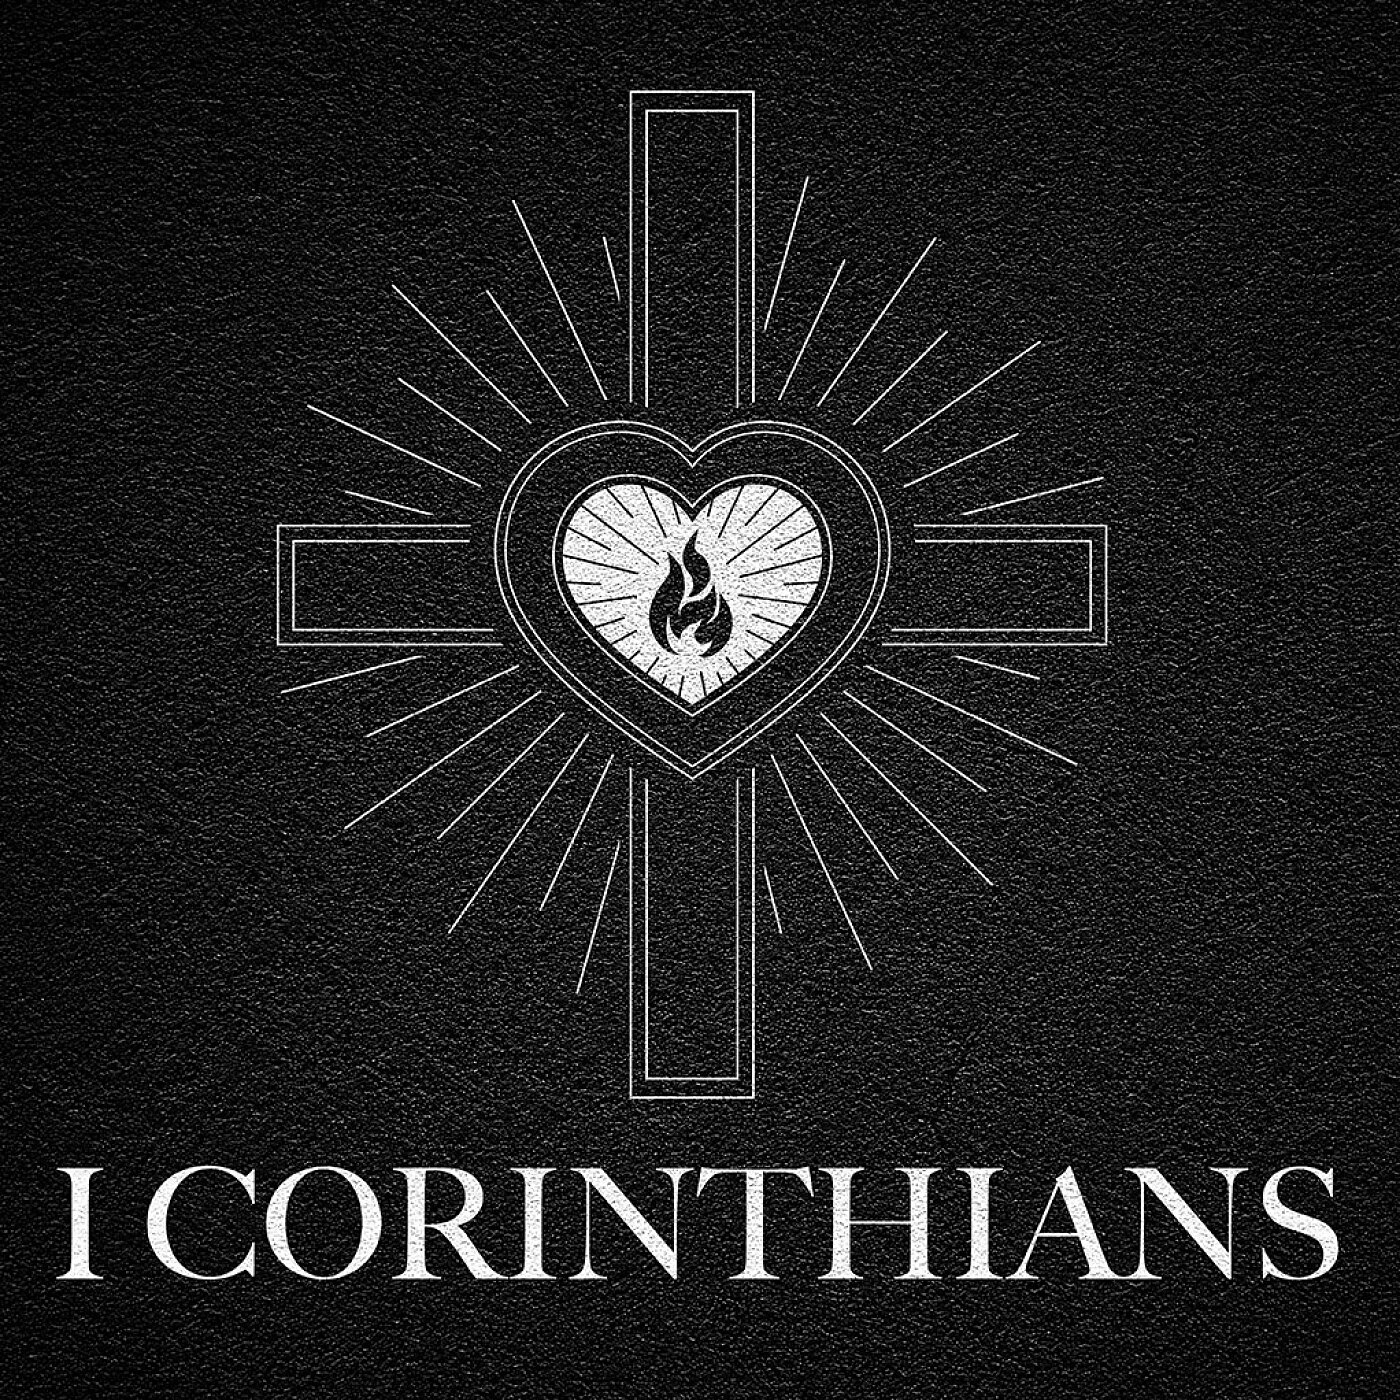 The Missing Ingredient Today (1 Corinthians 5)